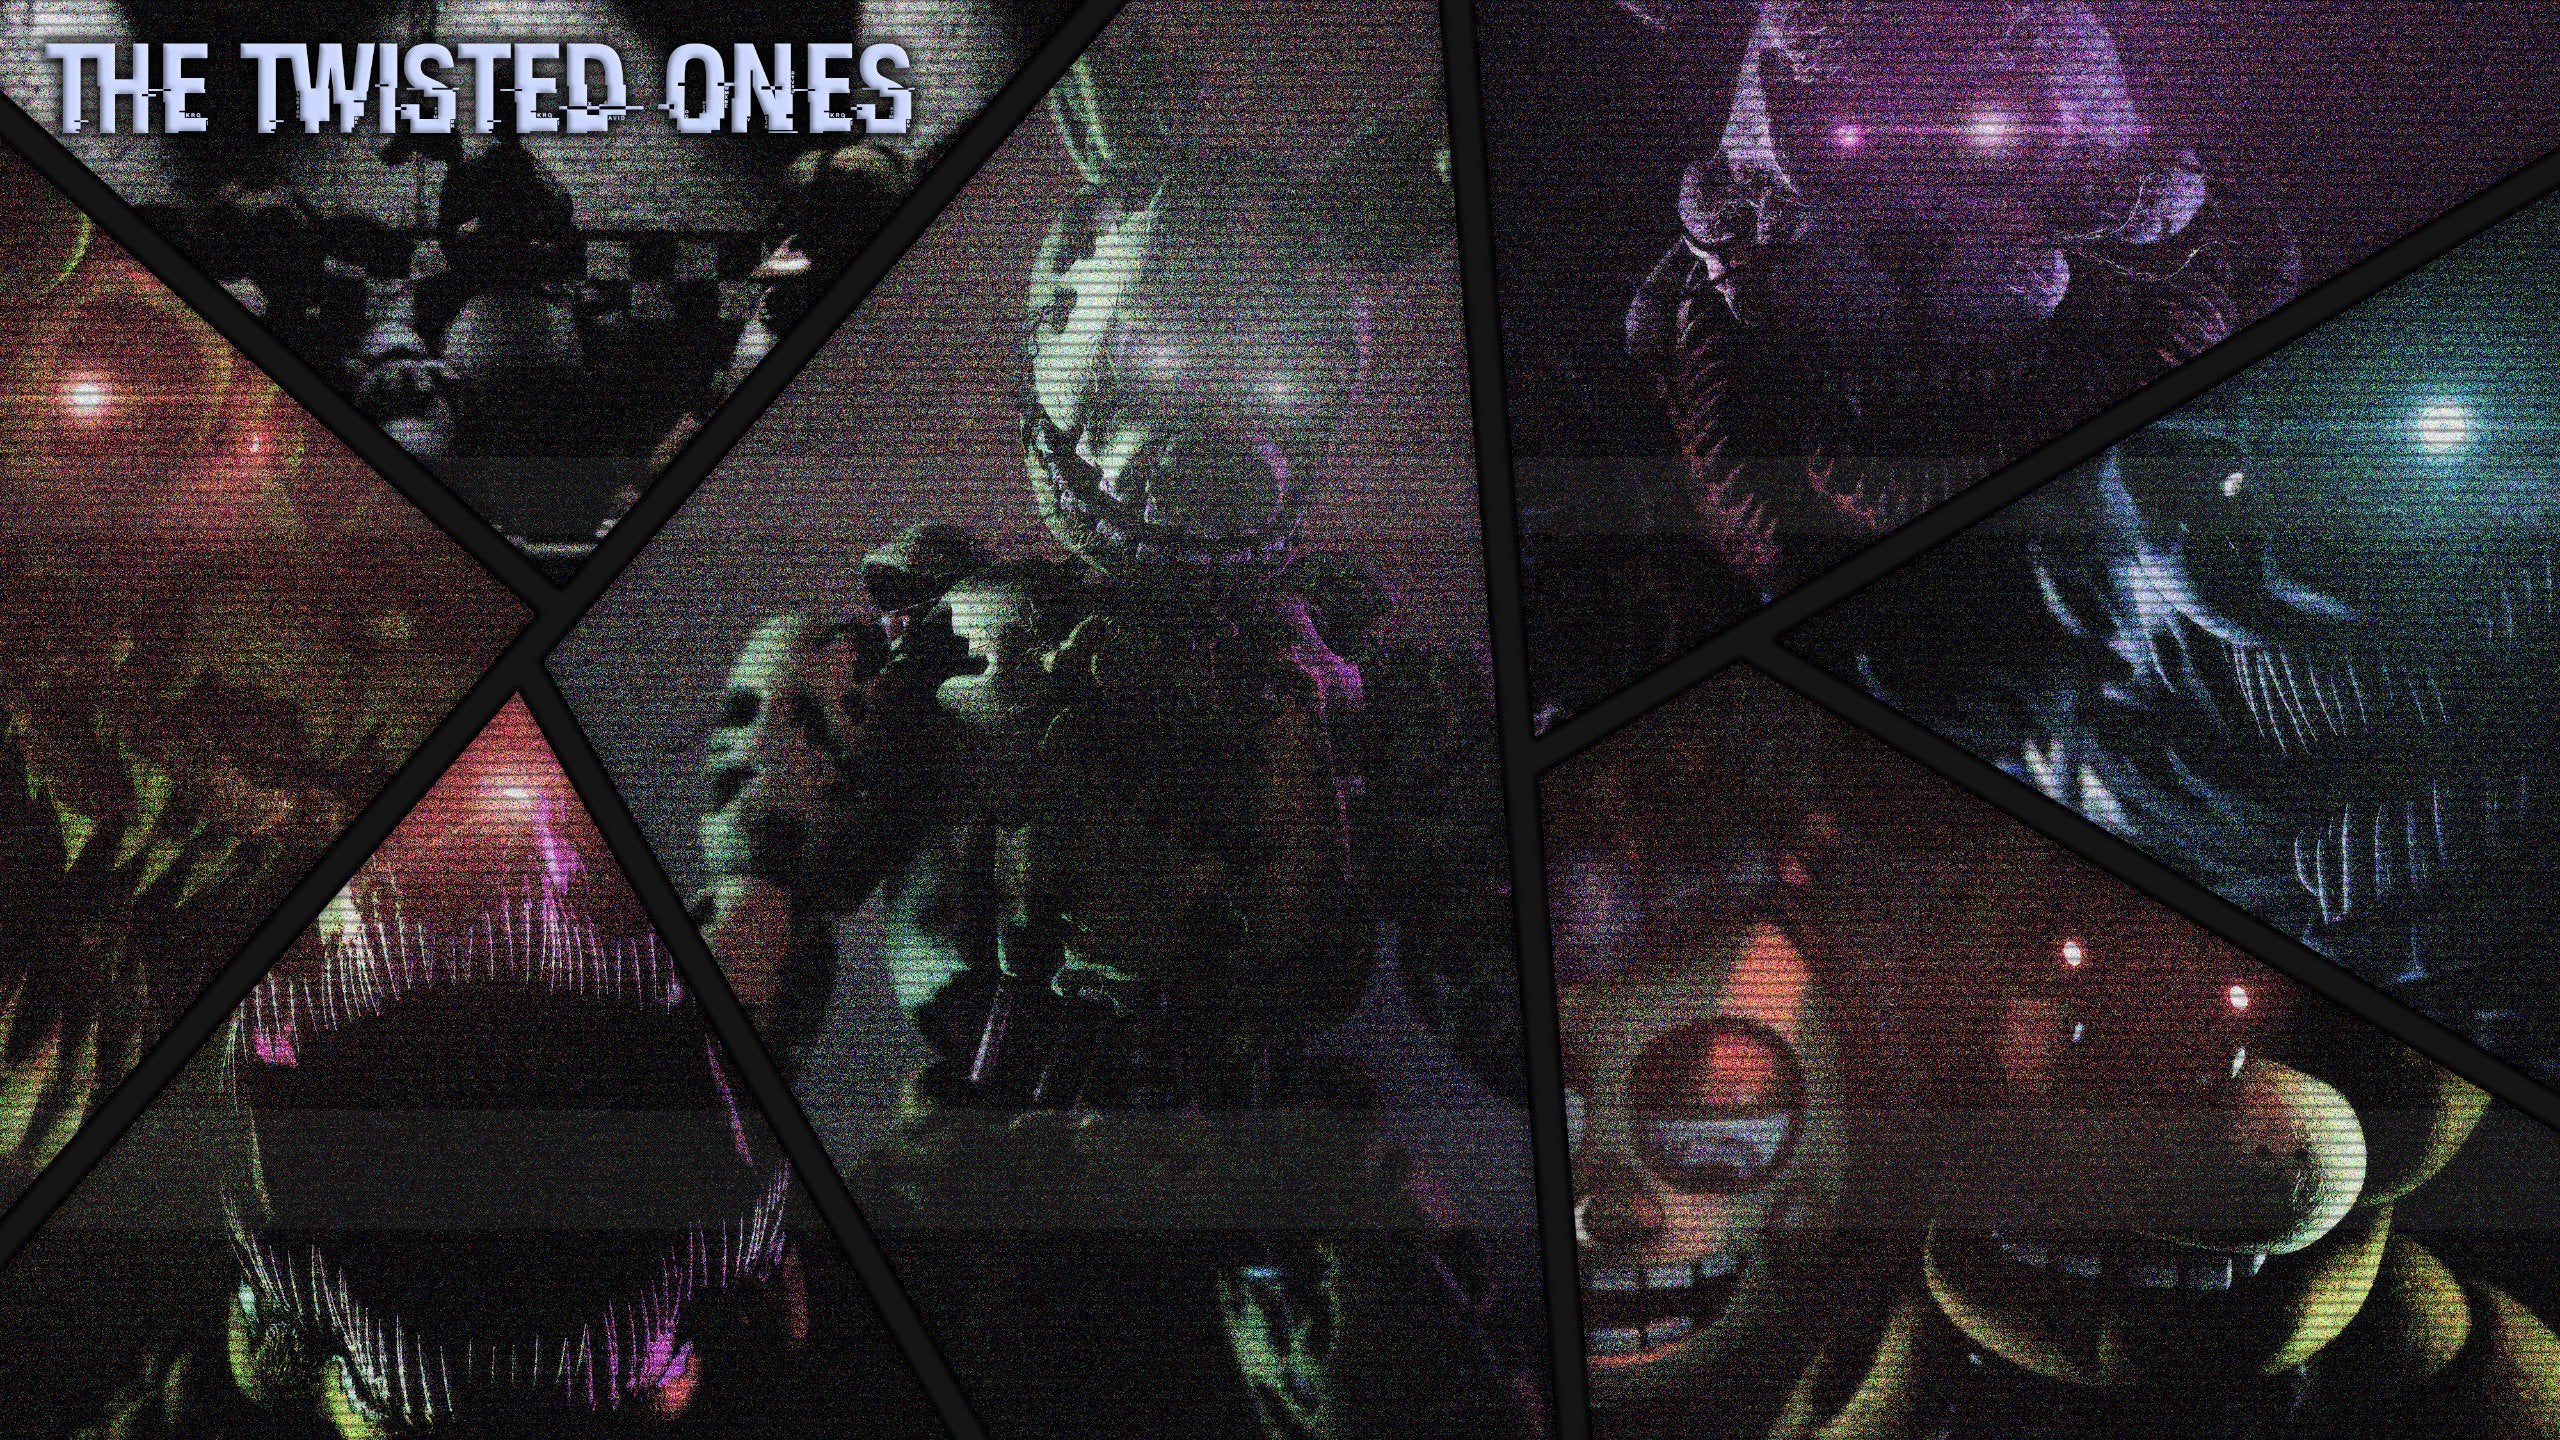 The Twisted Ones wallpaper. v1